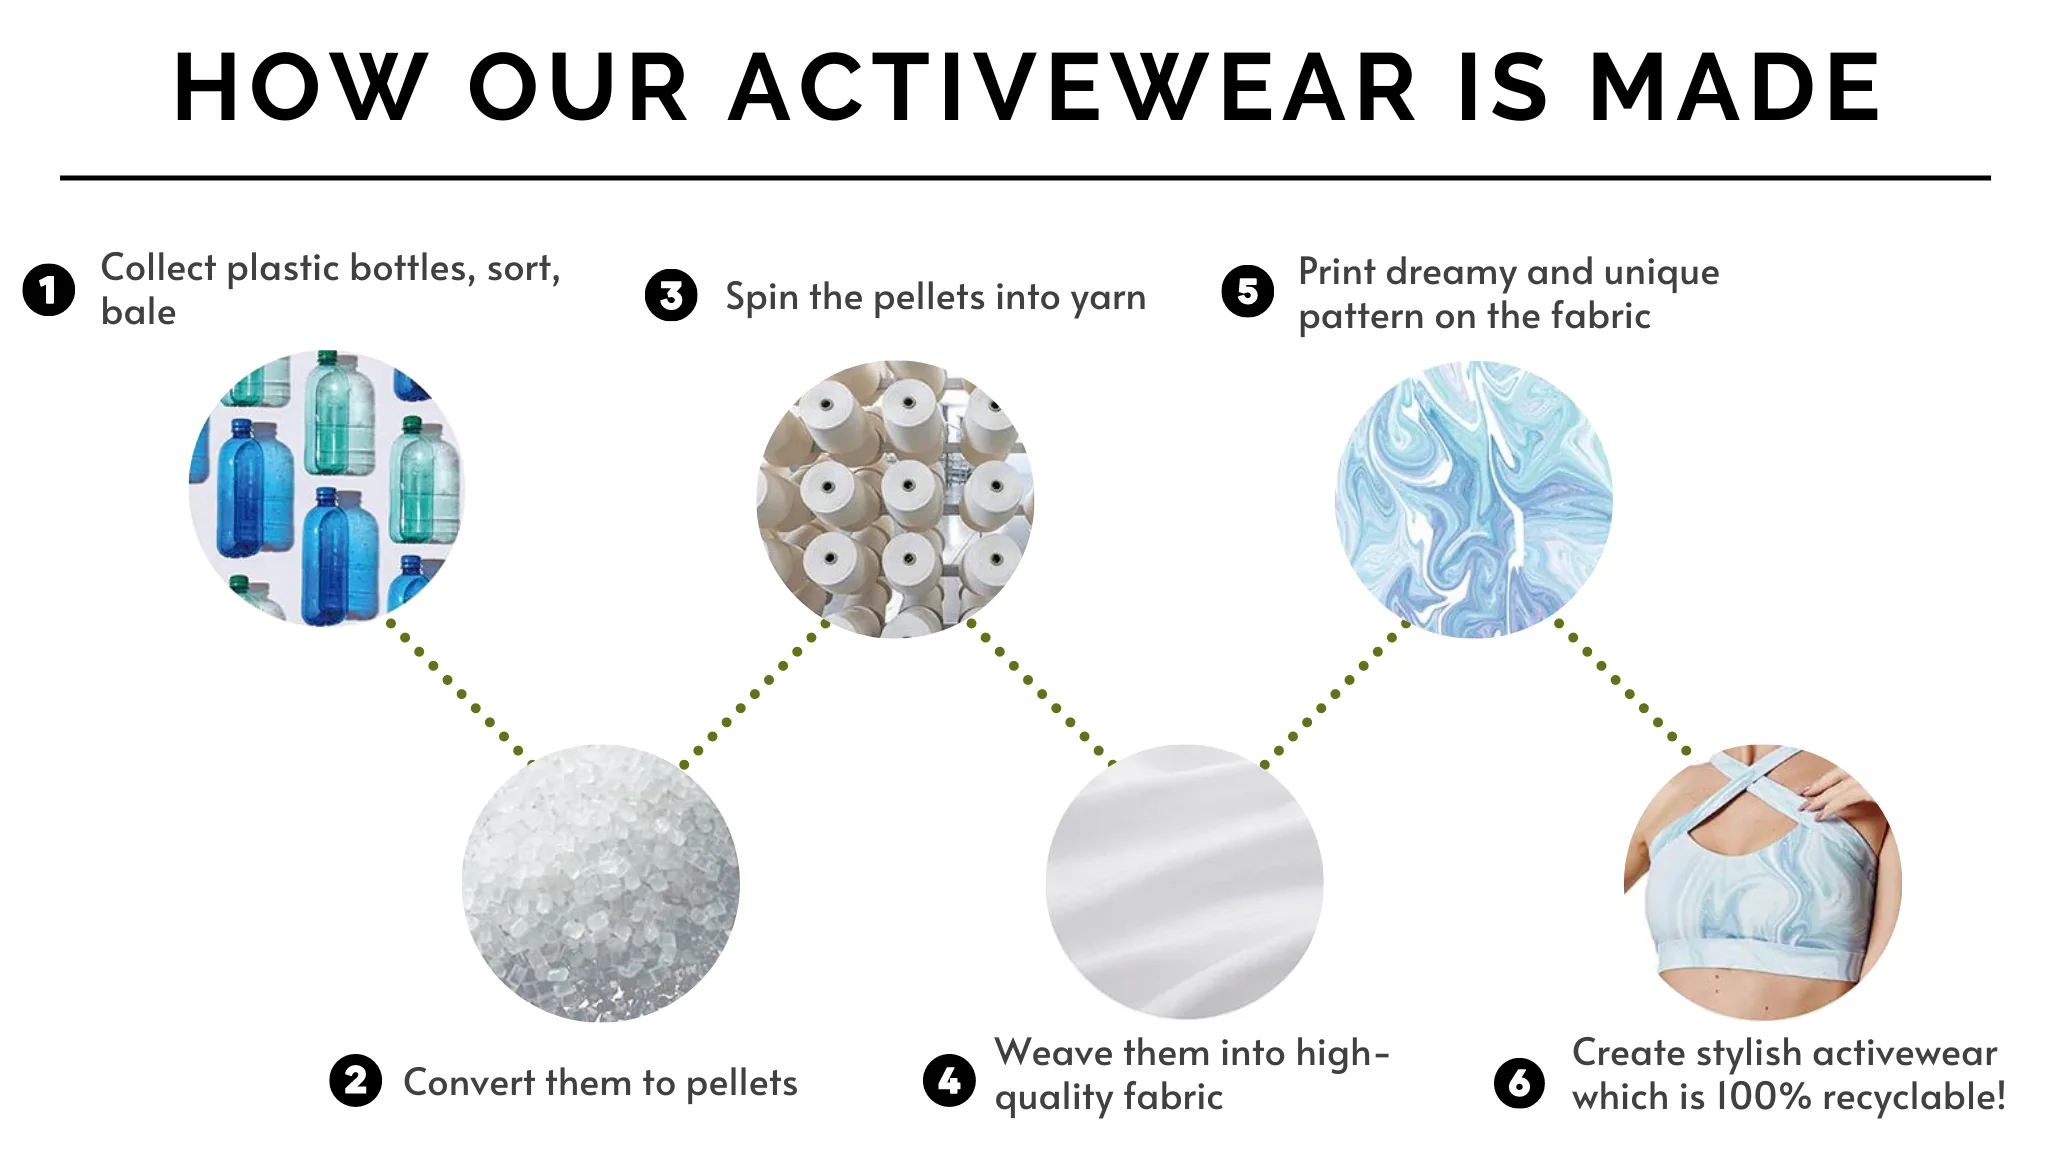 How Activewear is Made From Recycled Plastic Bottles